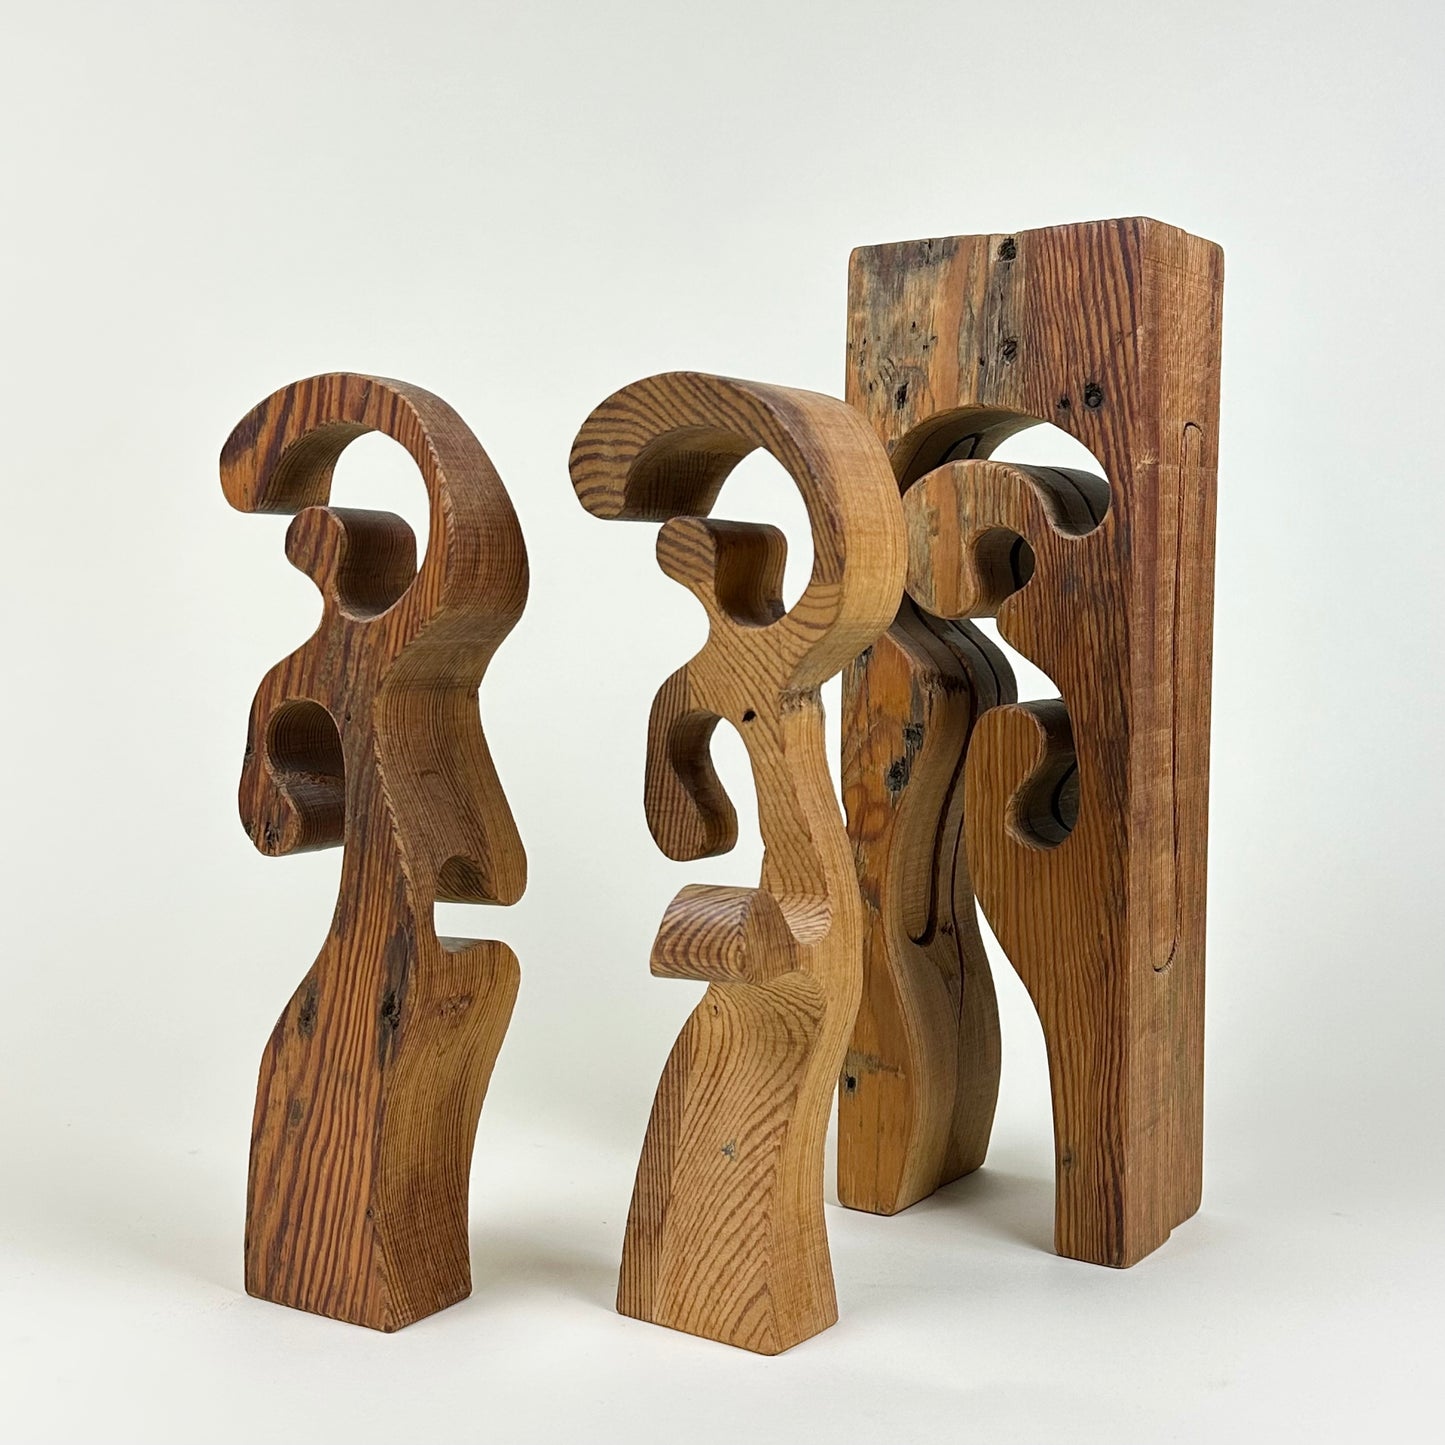 Wooden puzzle/sculpture by Gunnar Kanevad